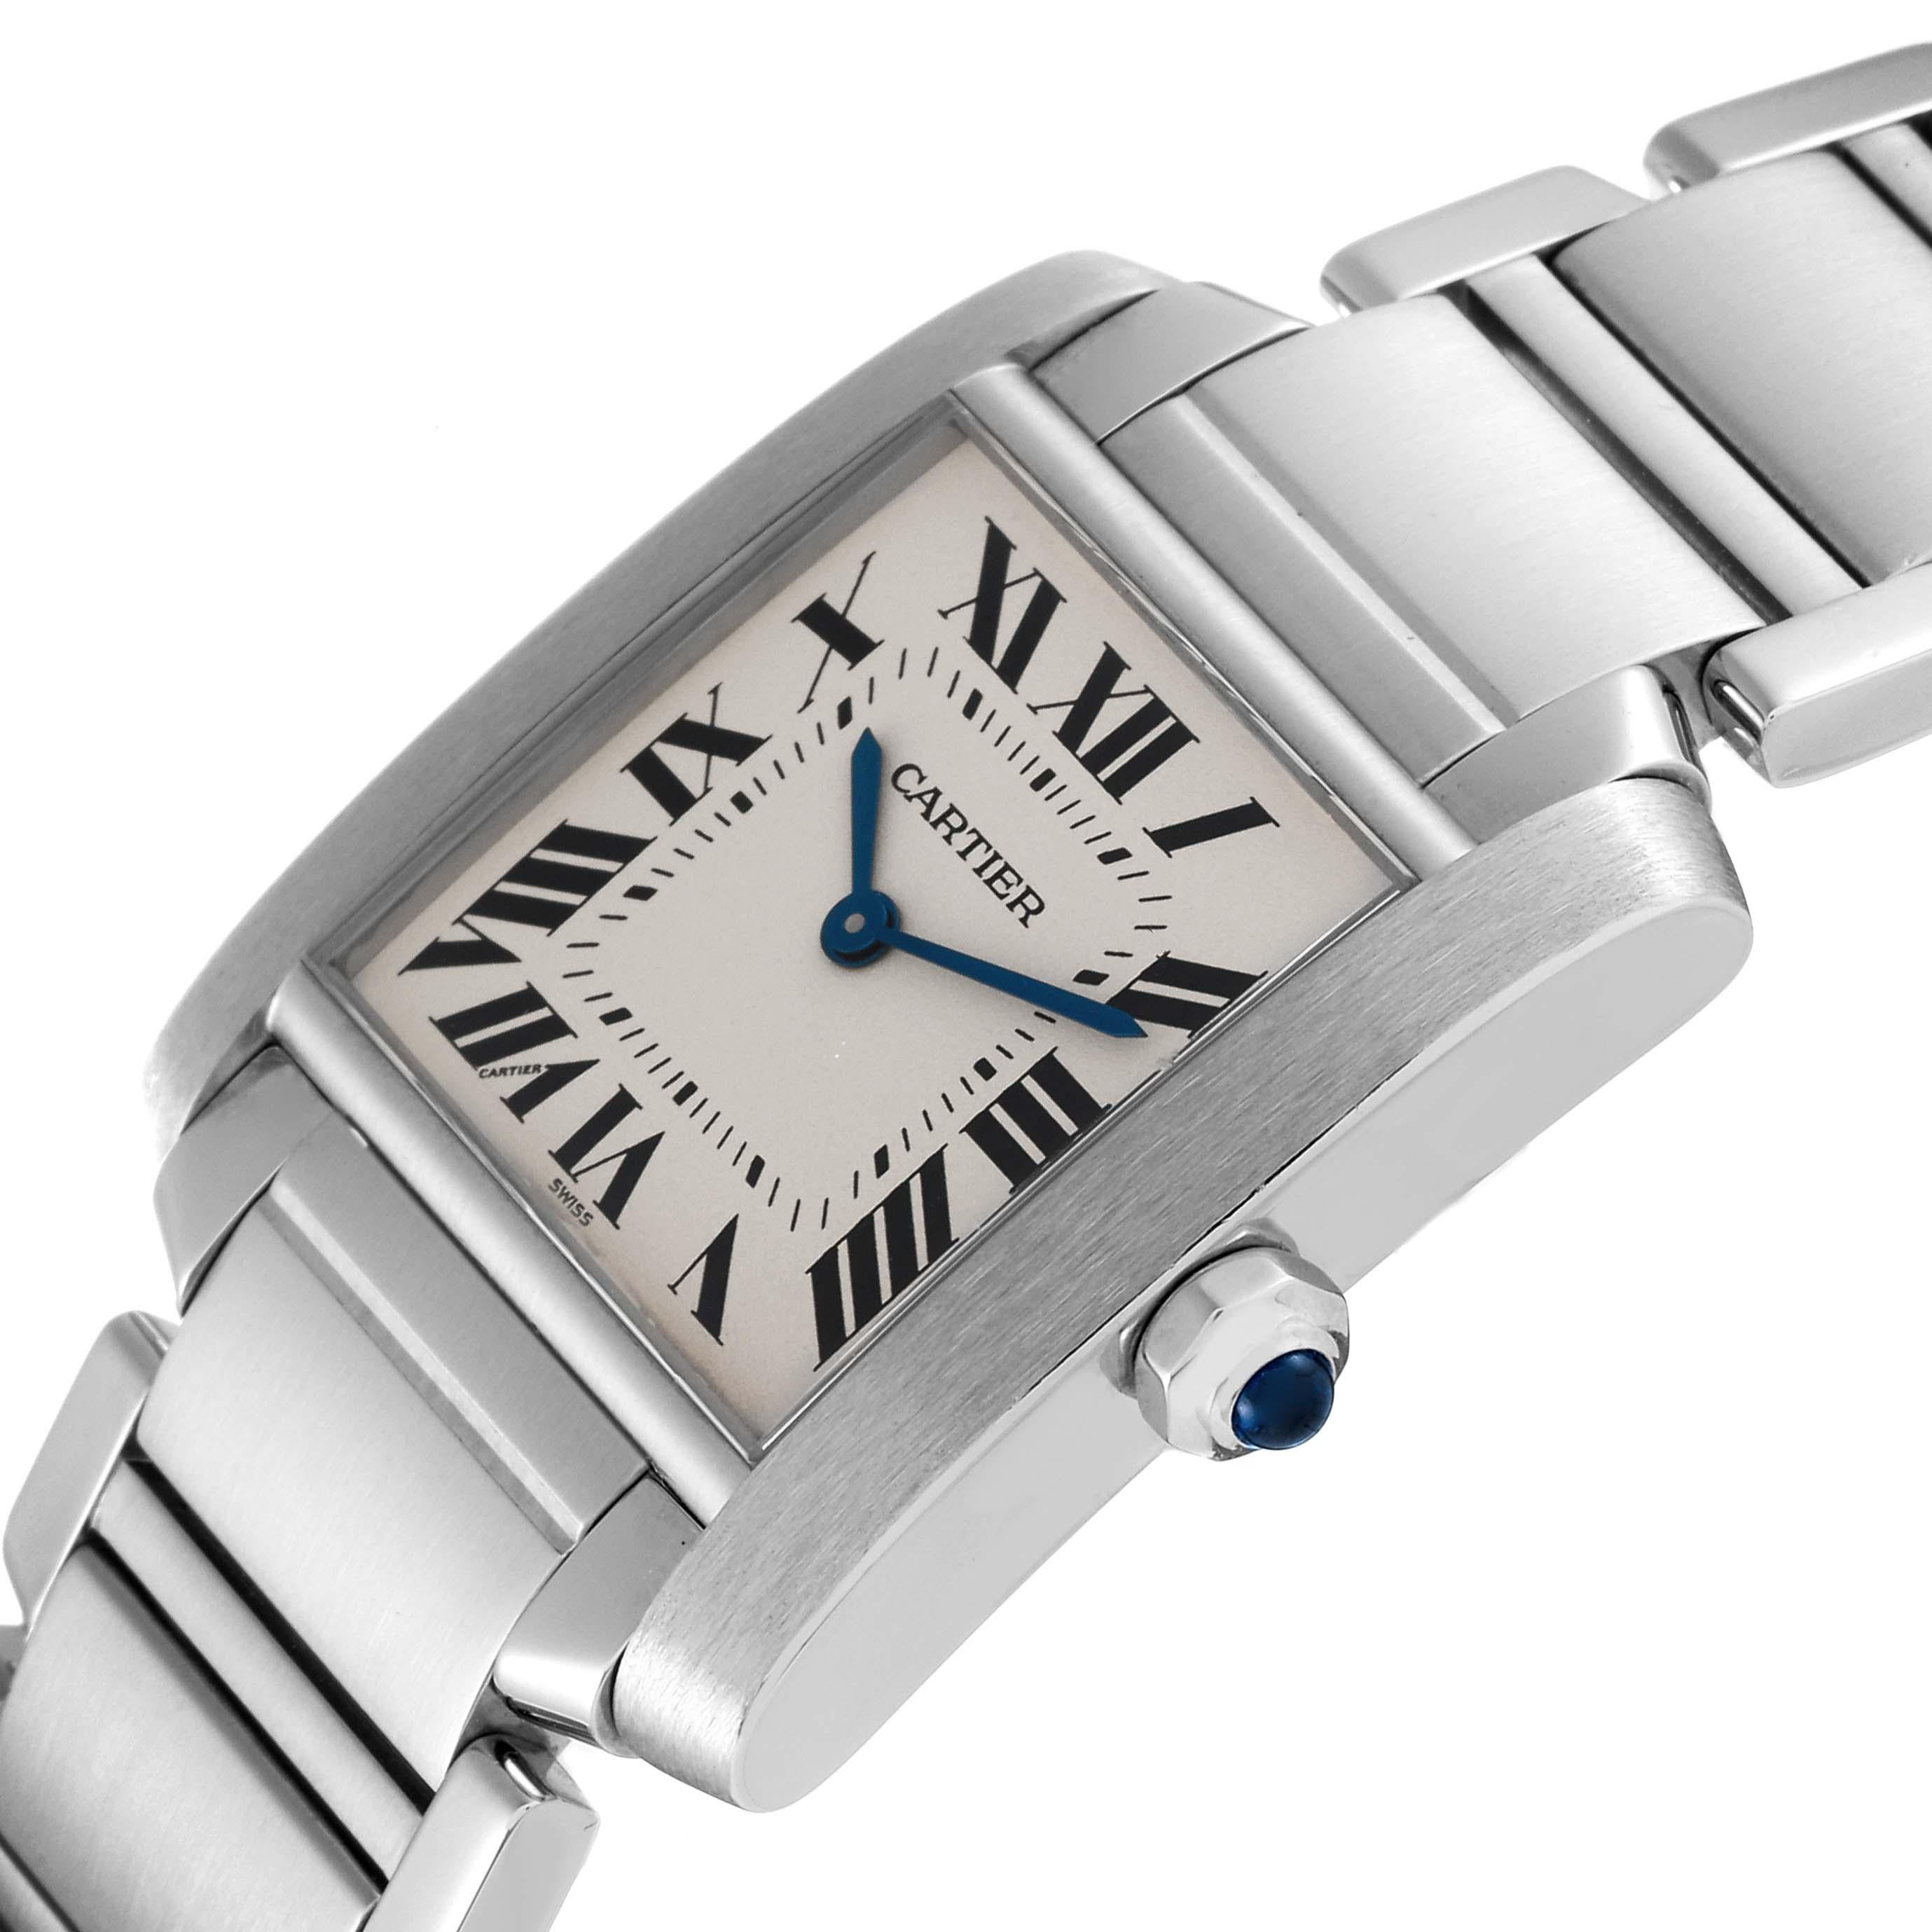 Cartier Tank Francaise Midsize Steel Ladies Watch WSTA0005 Box Papers 1